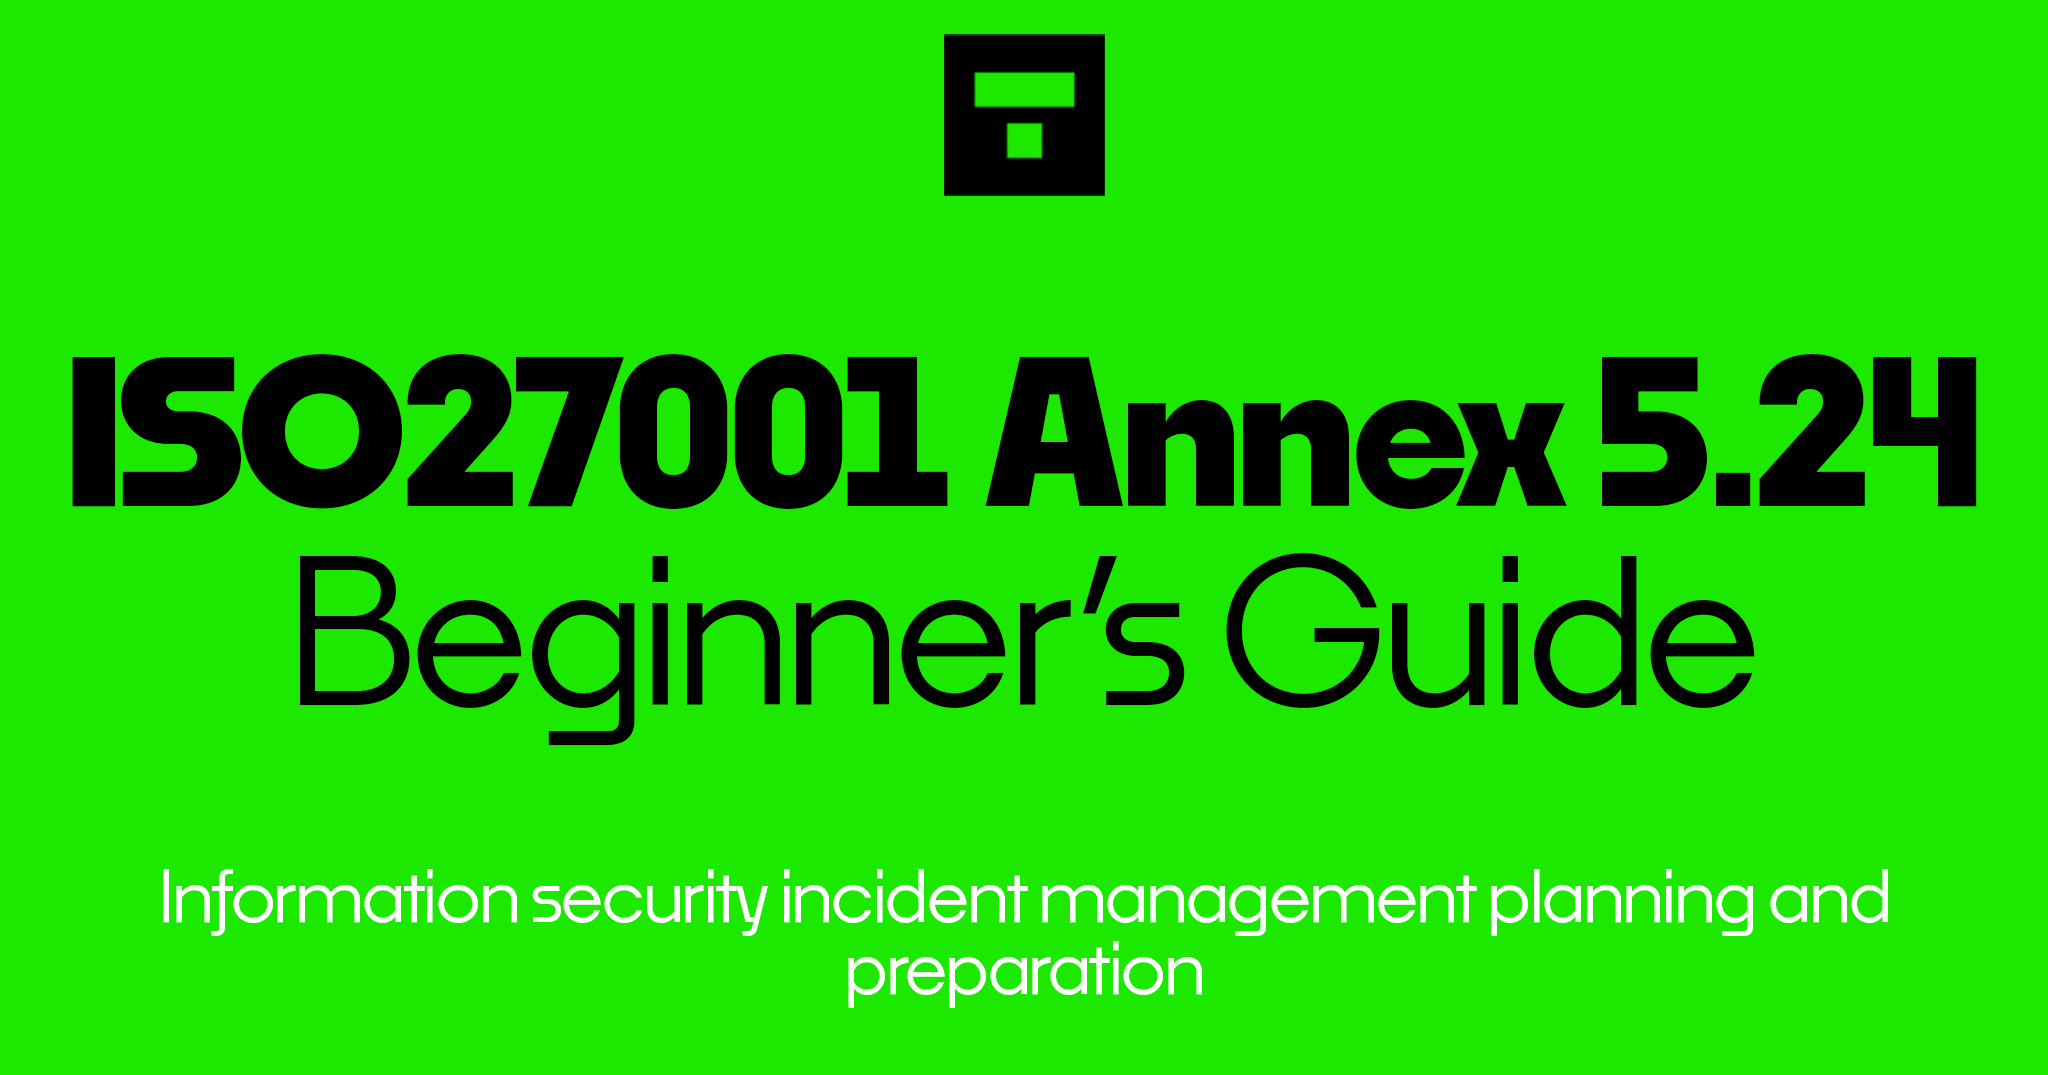 How To Implement ISO 27001 Annex A 5.24 Information Security Incident Management Planning and Preparation